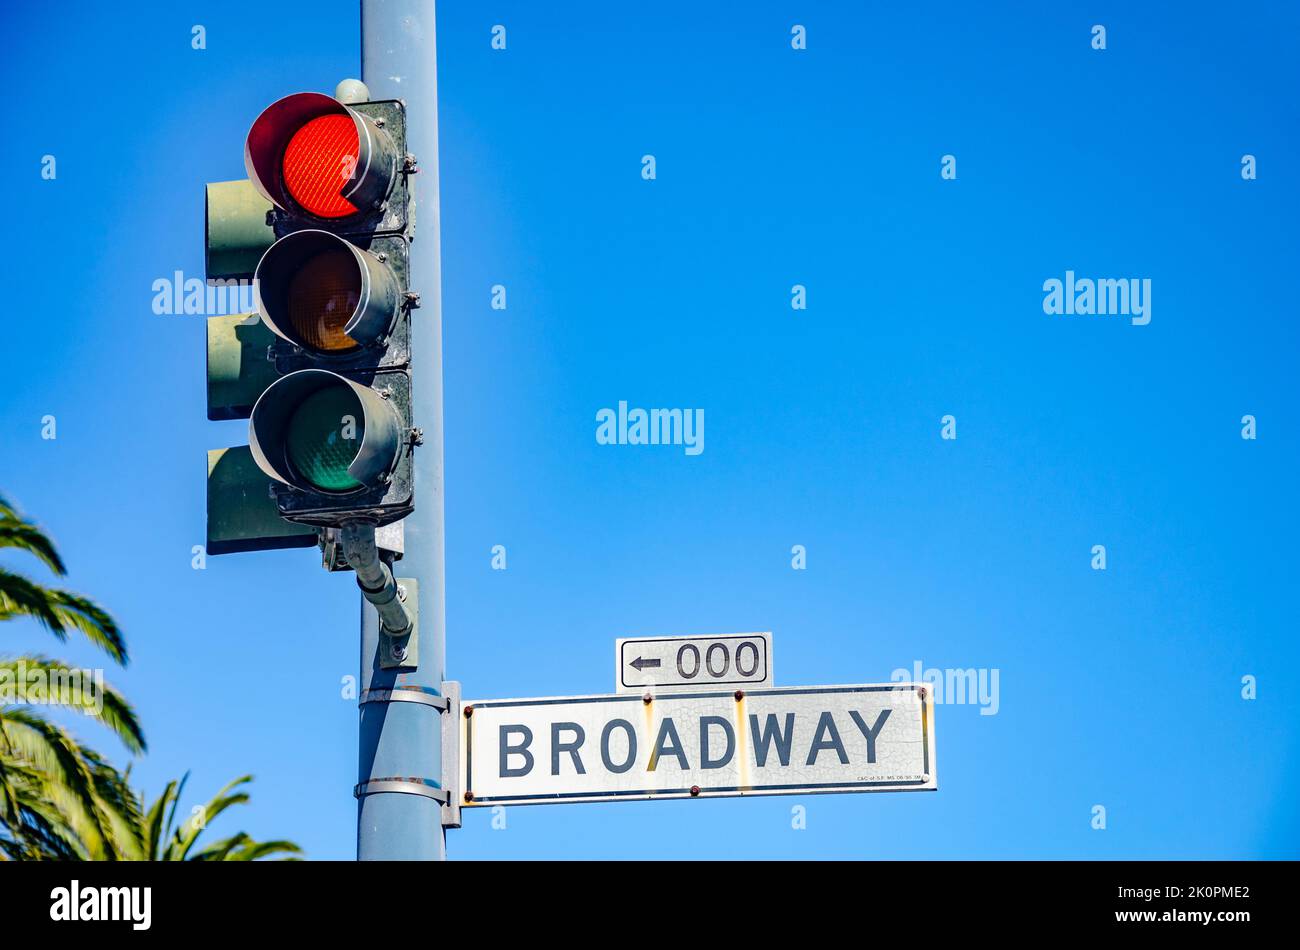 A red traffic light and a street sign for 'Broadway' against a clear blue summer sky in San Francisco, California Stock Photo